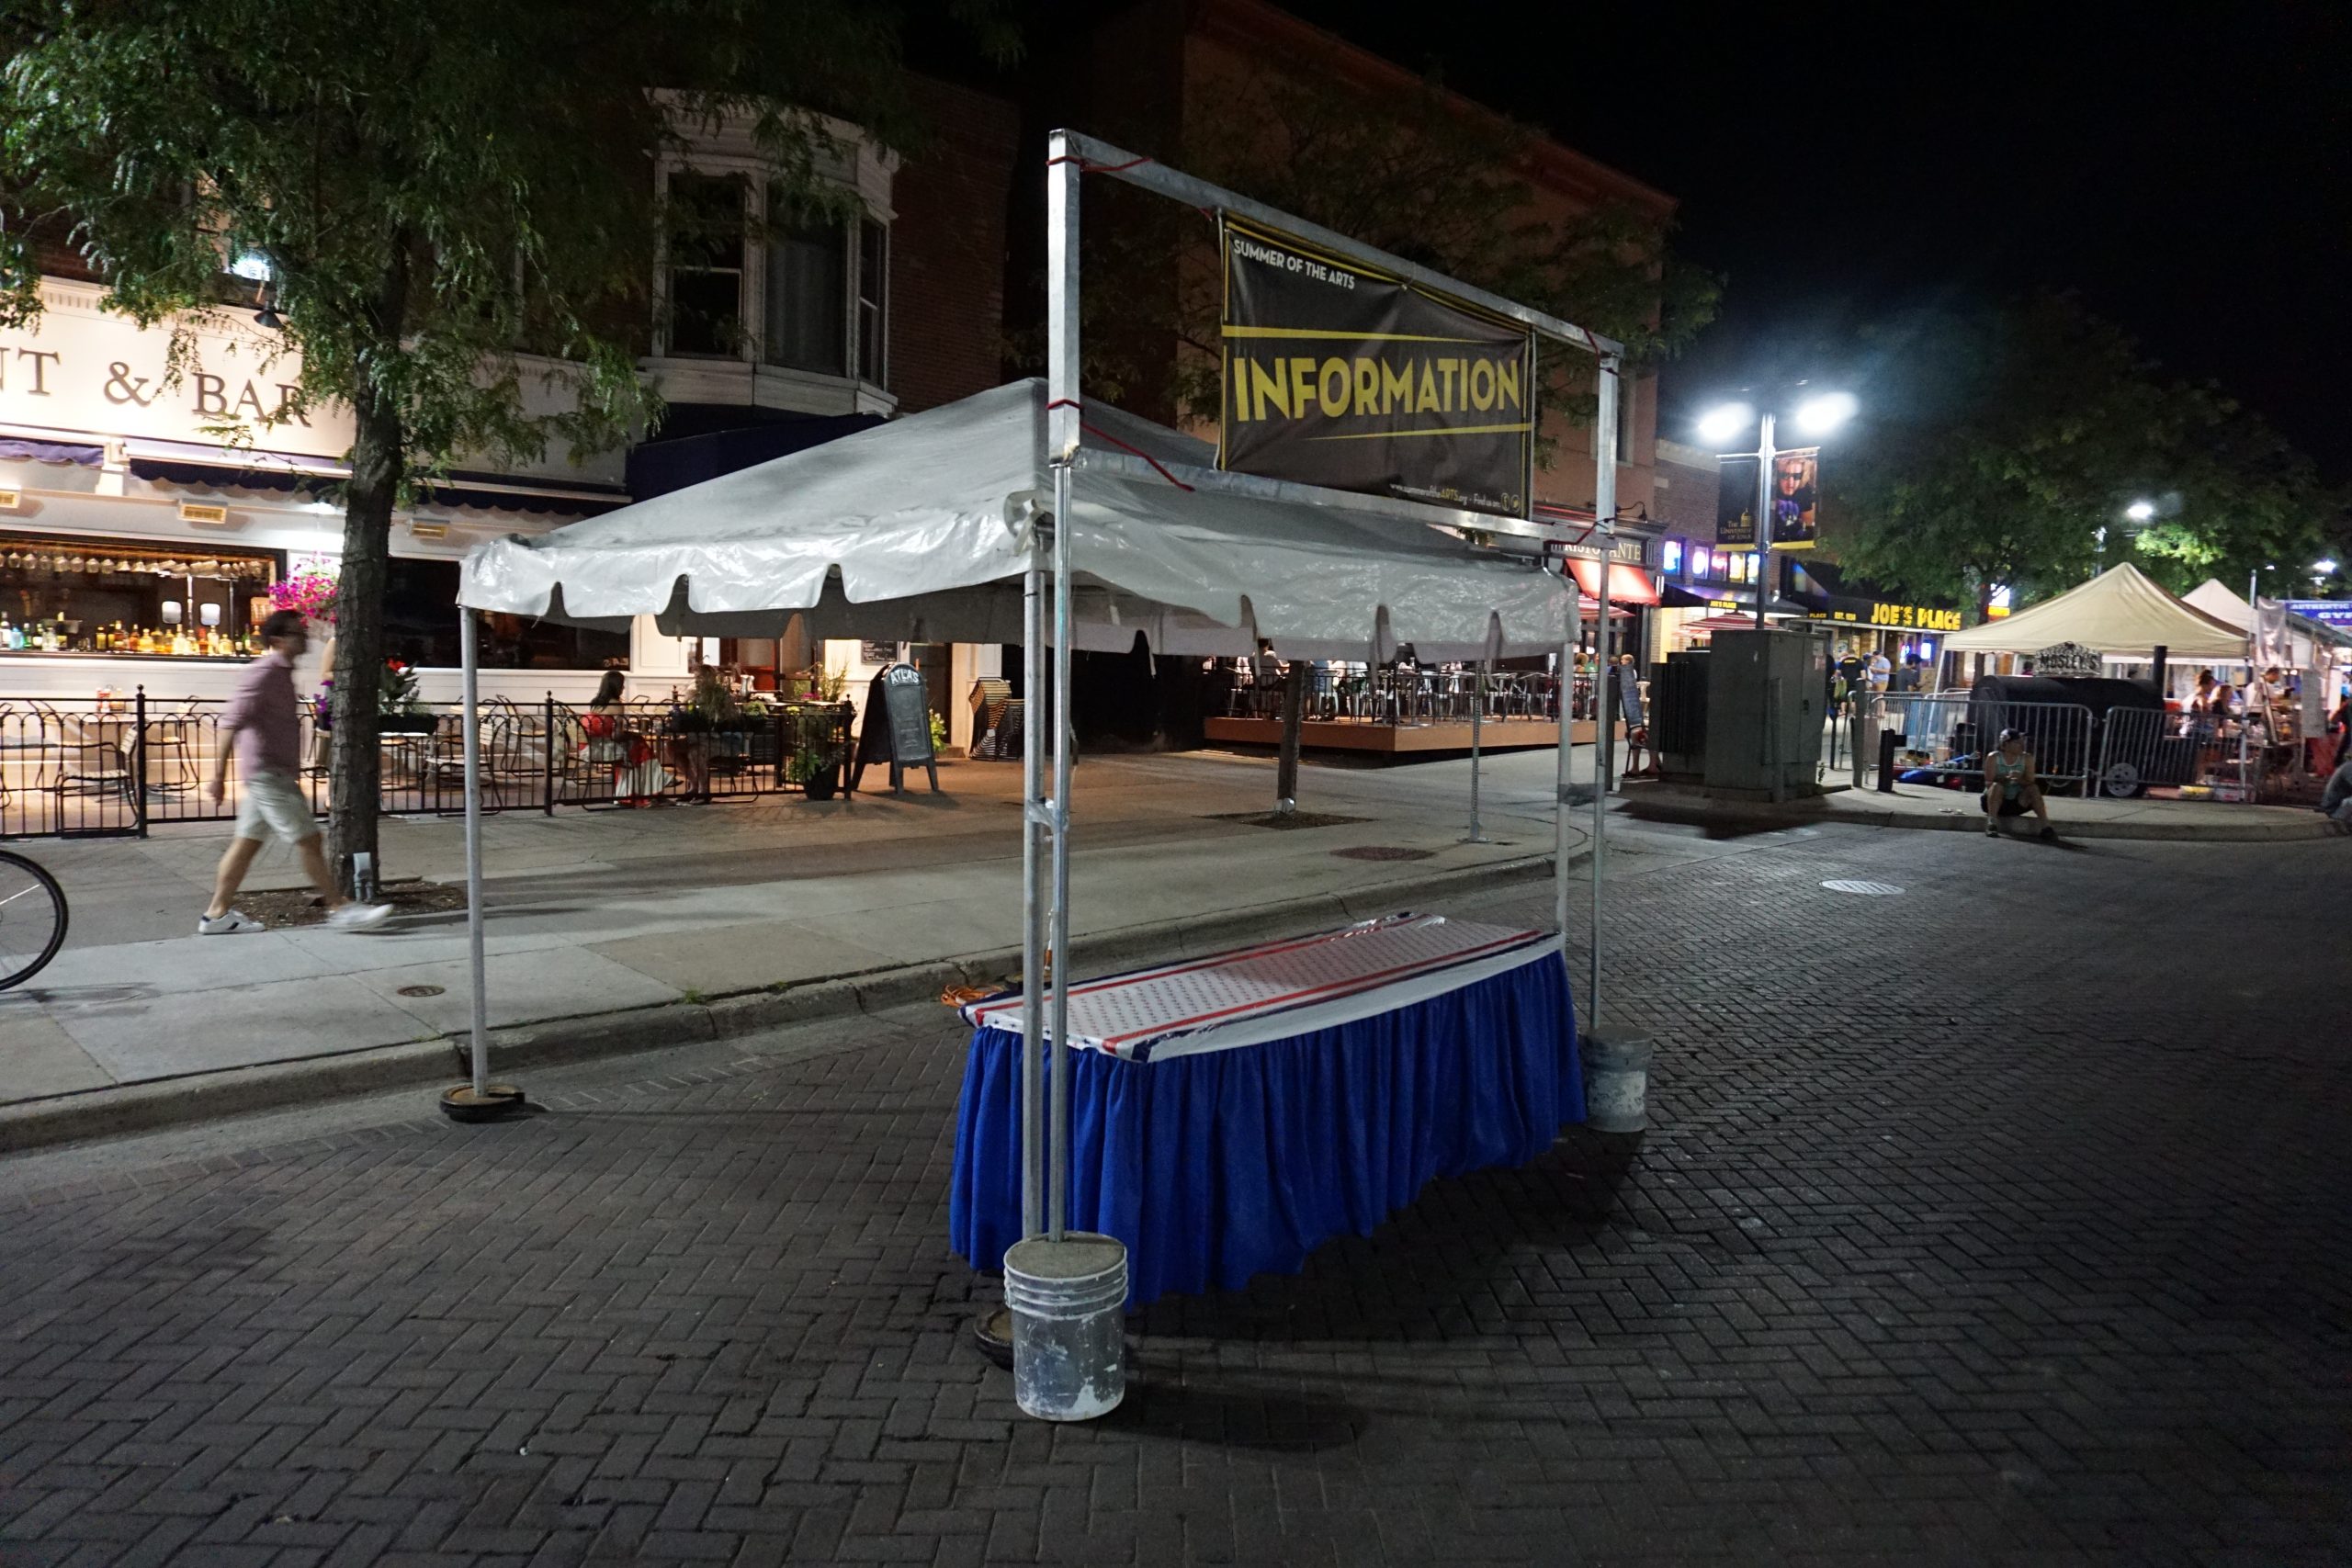 Information tent at the 2017 Iowa City Jazz Festival